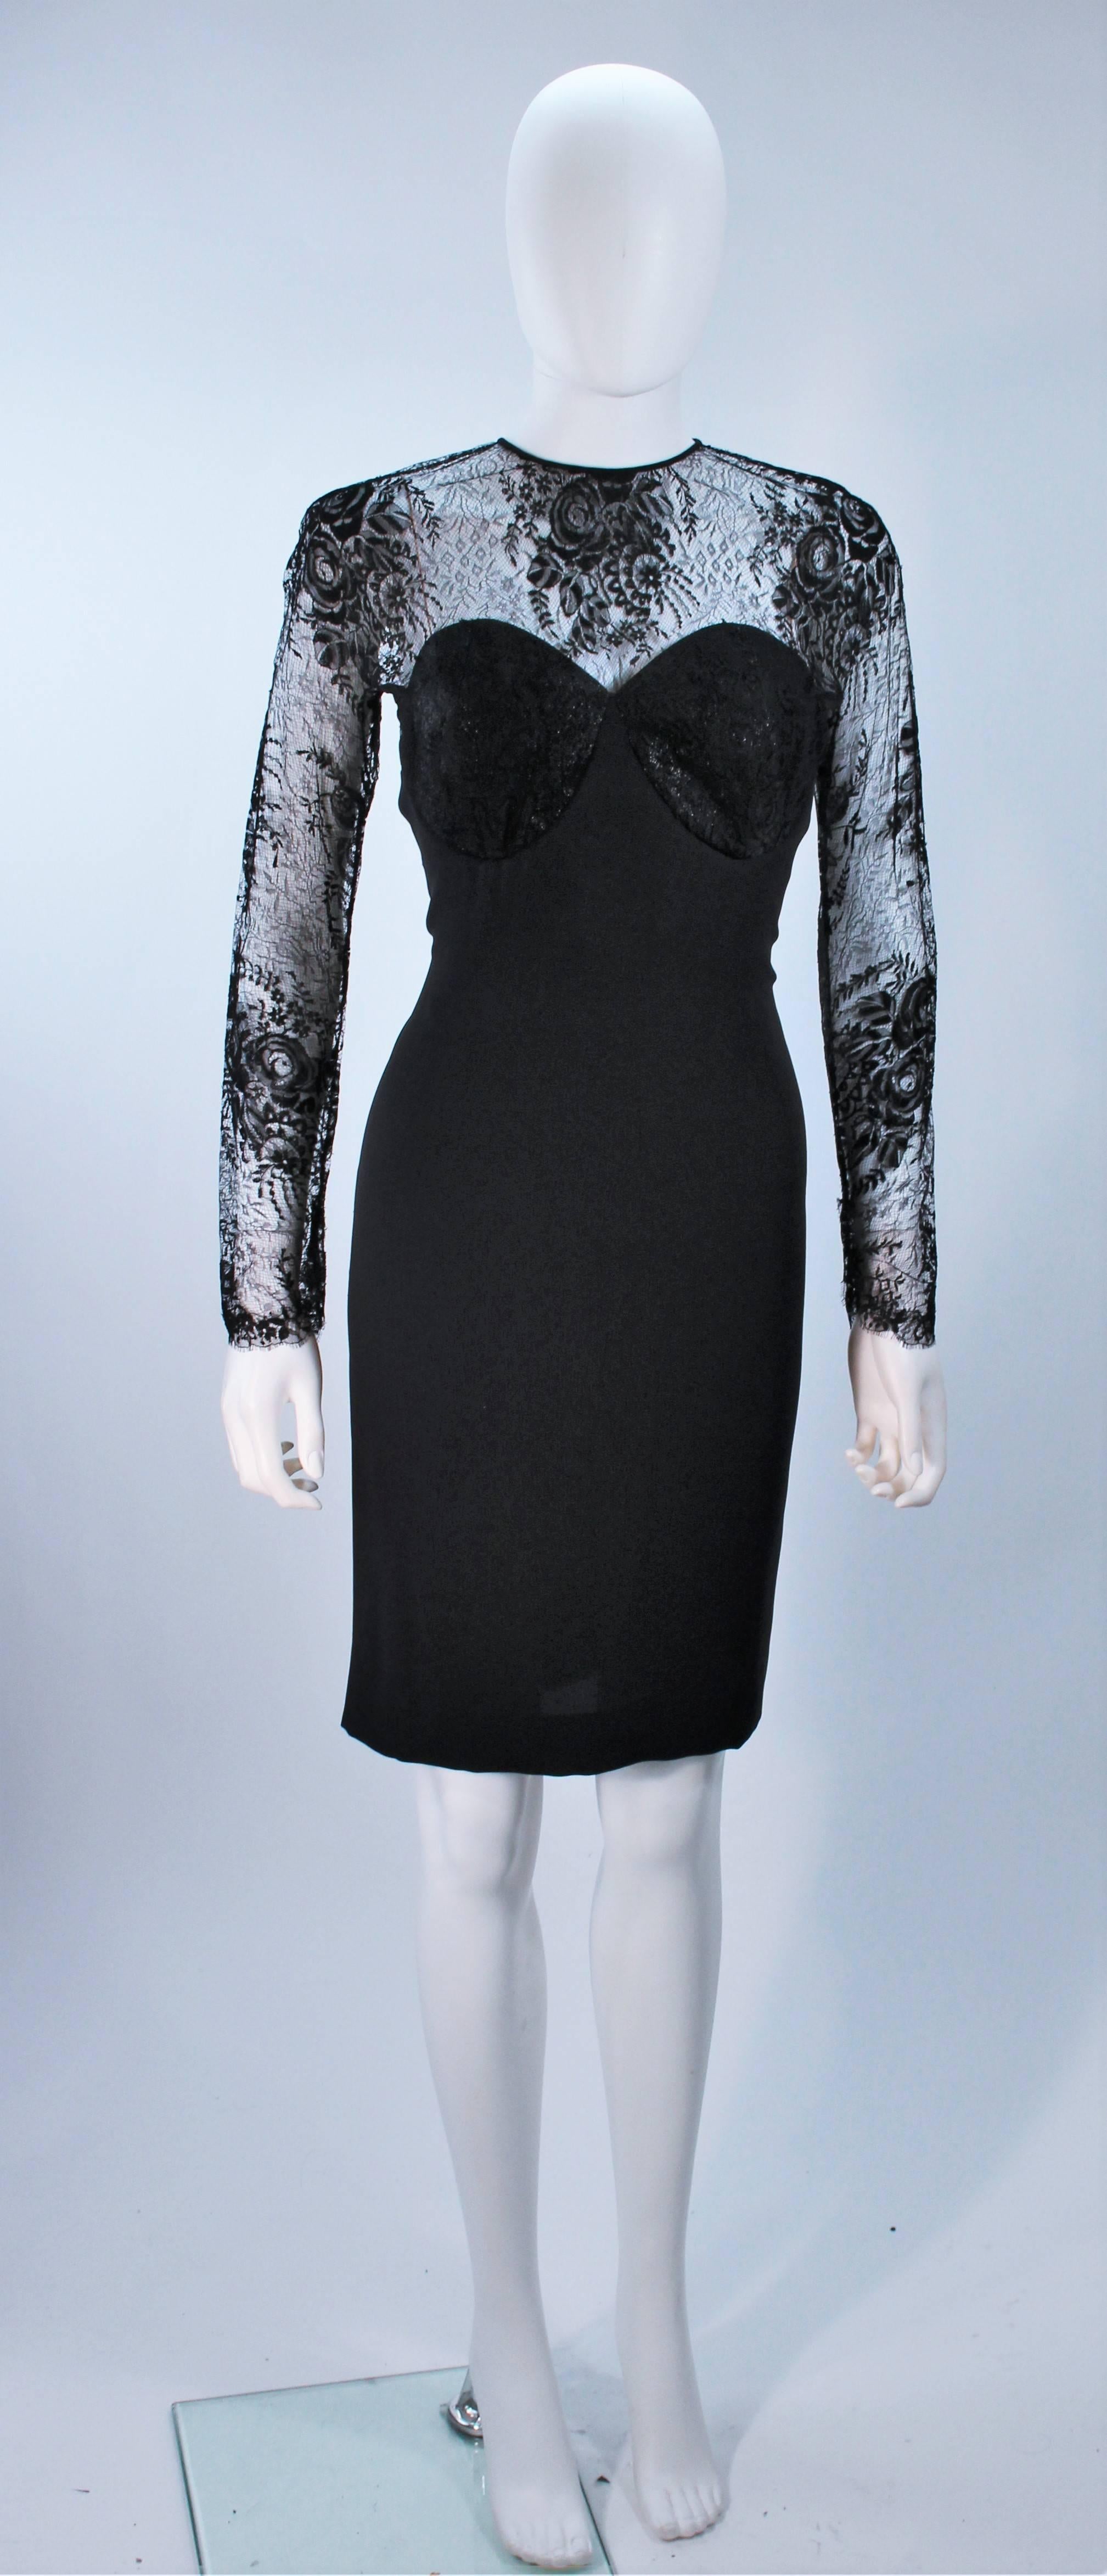  This Galanos  dress is composed of a fine black lace, with silk body, and metallic bust accent. There are scalloped edges. There is a center back zipper closure, and snaps at the sleeve end. In excellent vintage condition. 

  **Please